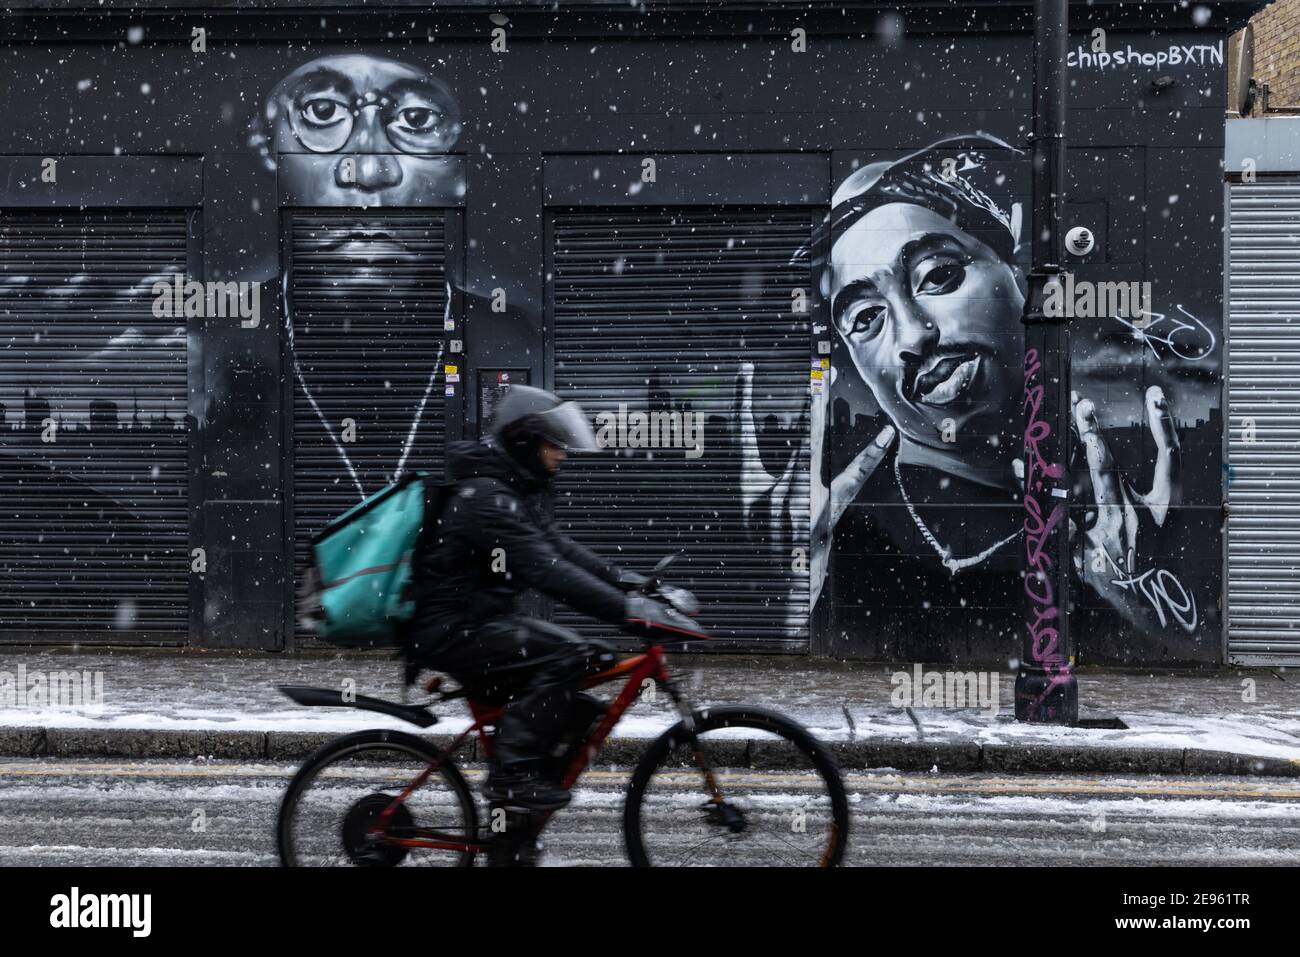 A deliveroo rider cycles past street murals of rappers 'Big L' and '2Pac' during heavy snow, Atlantic Road, Brixton, London, 24 January 2021 Stock Photo